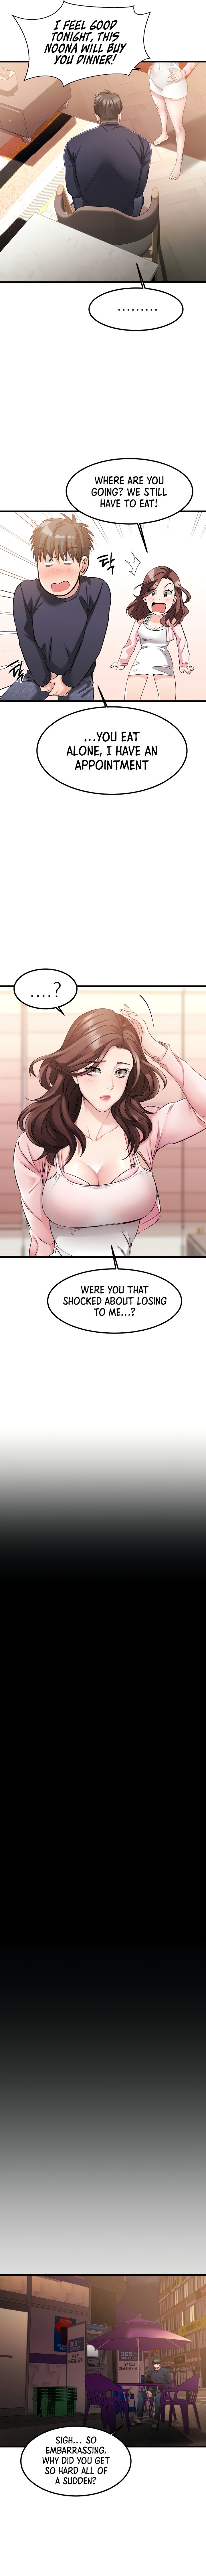 My Female Friend Who Crossed The Line - Chapter 2 Page 14